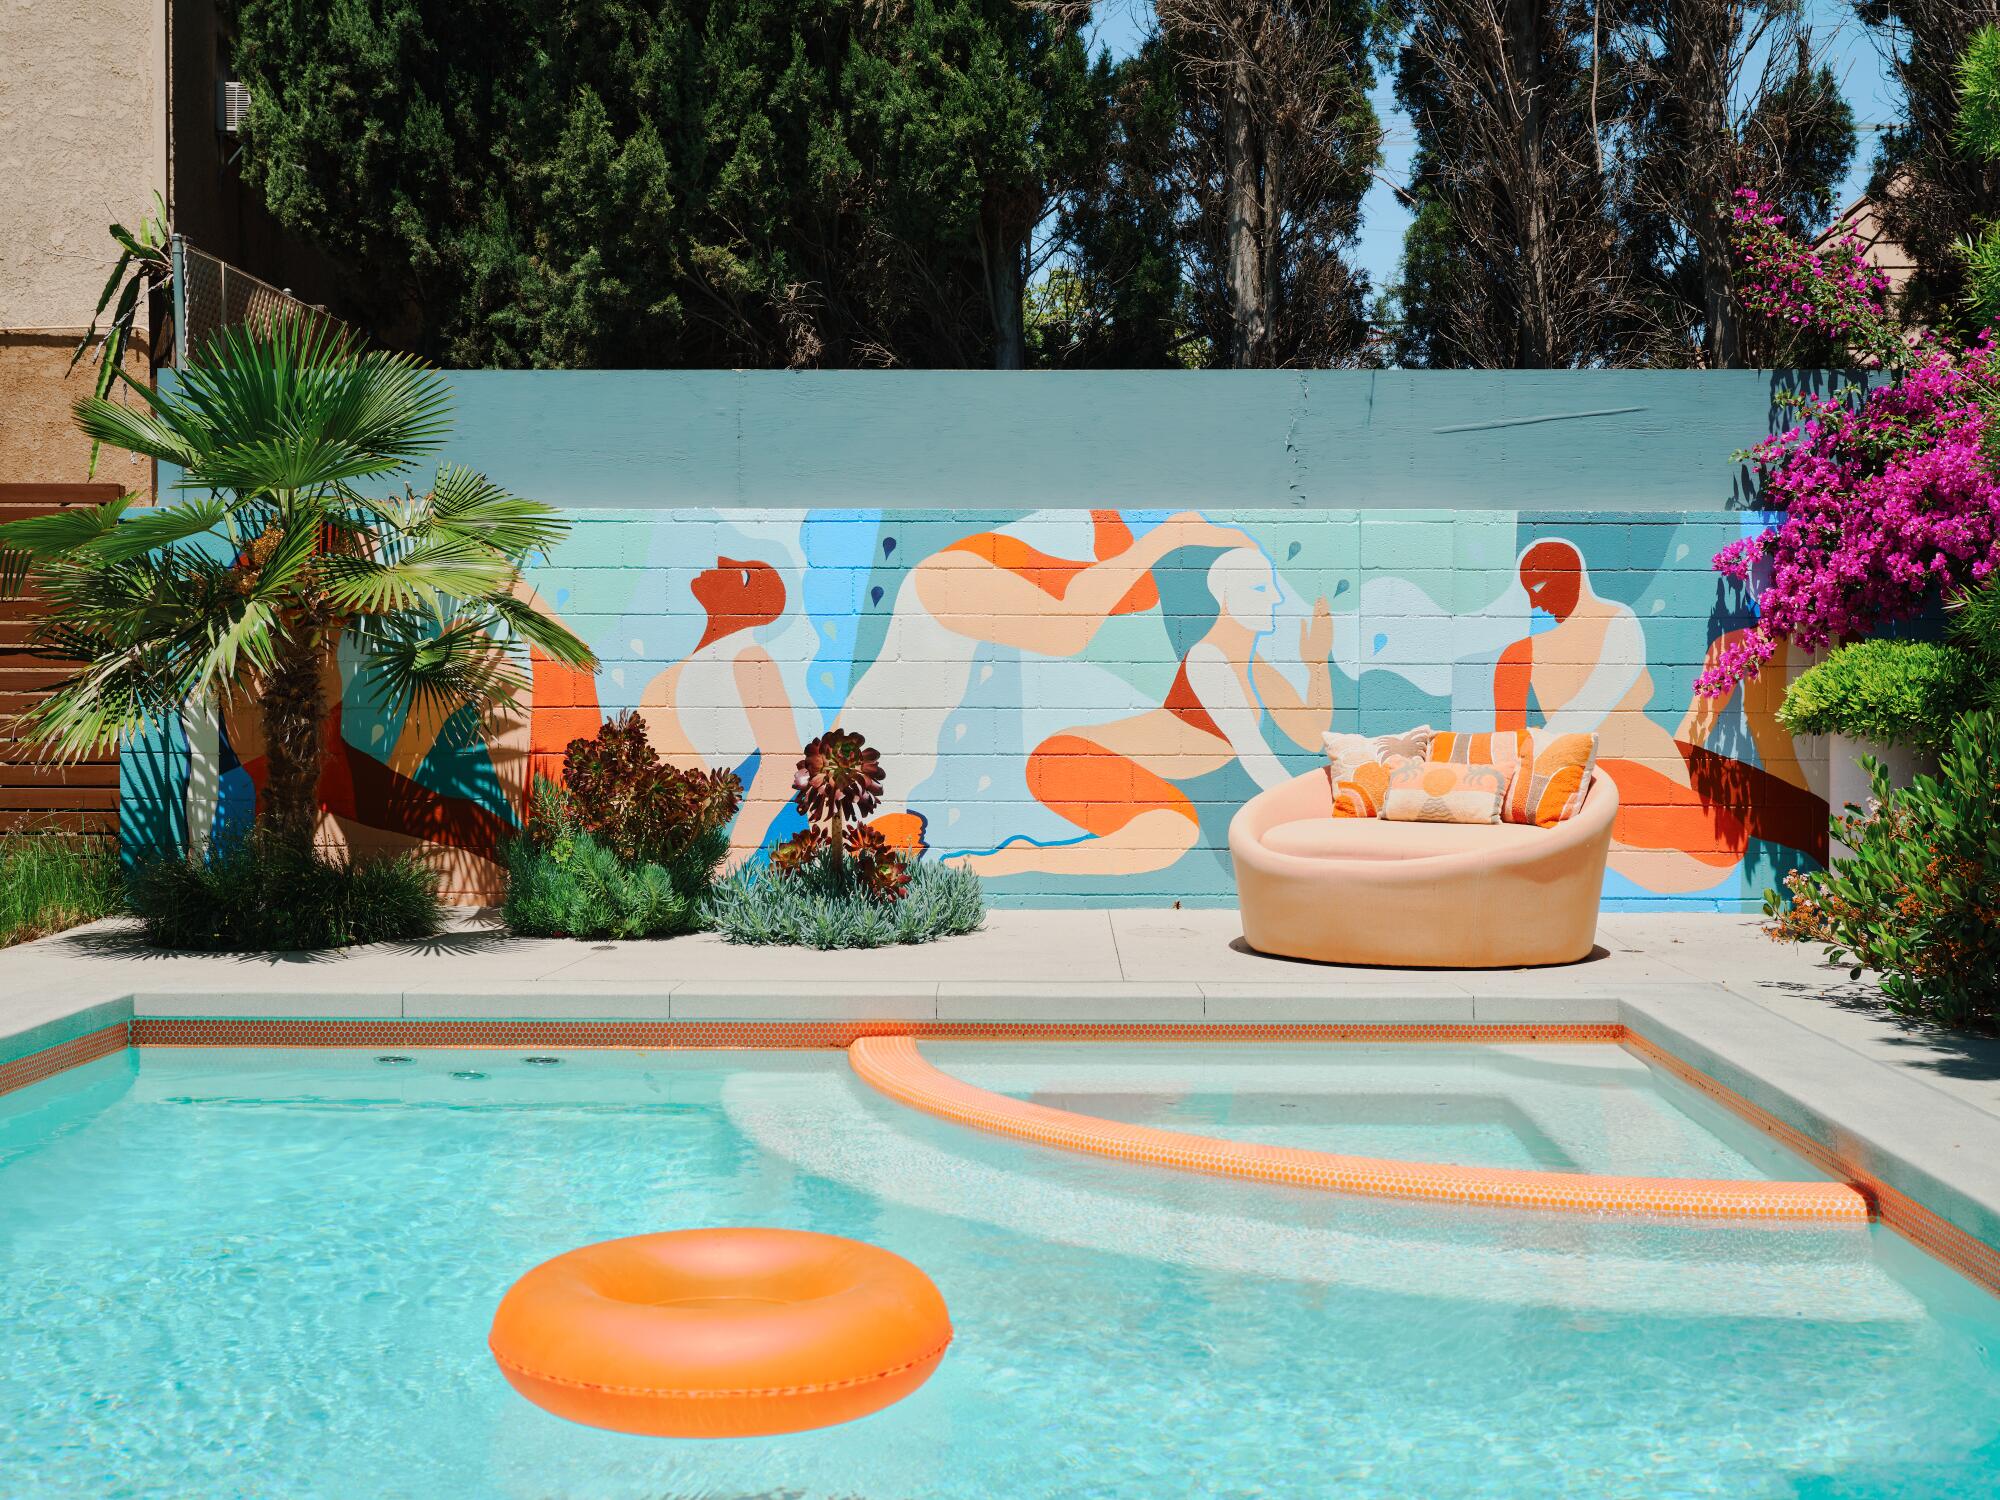 An orange inflatable ring floats in the pool in front of a mural depicting bathers dressed in orange.